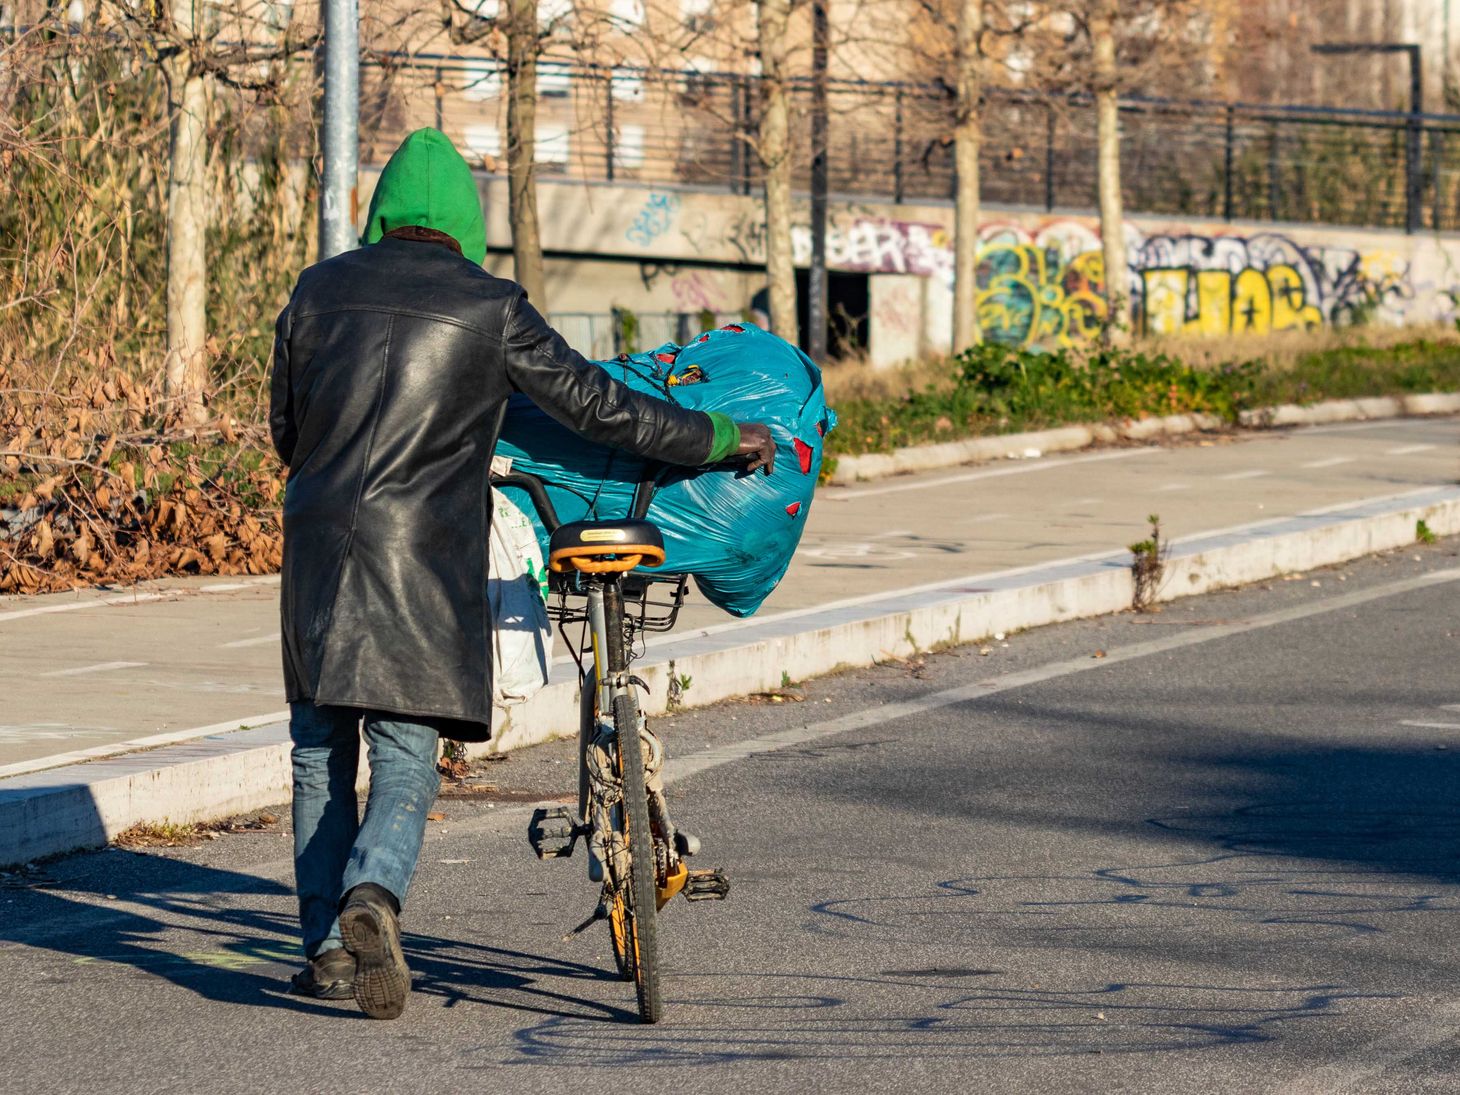 back of homeless man pushing a bicycle with a bag of belongings balanced on top